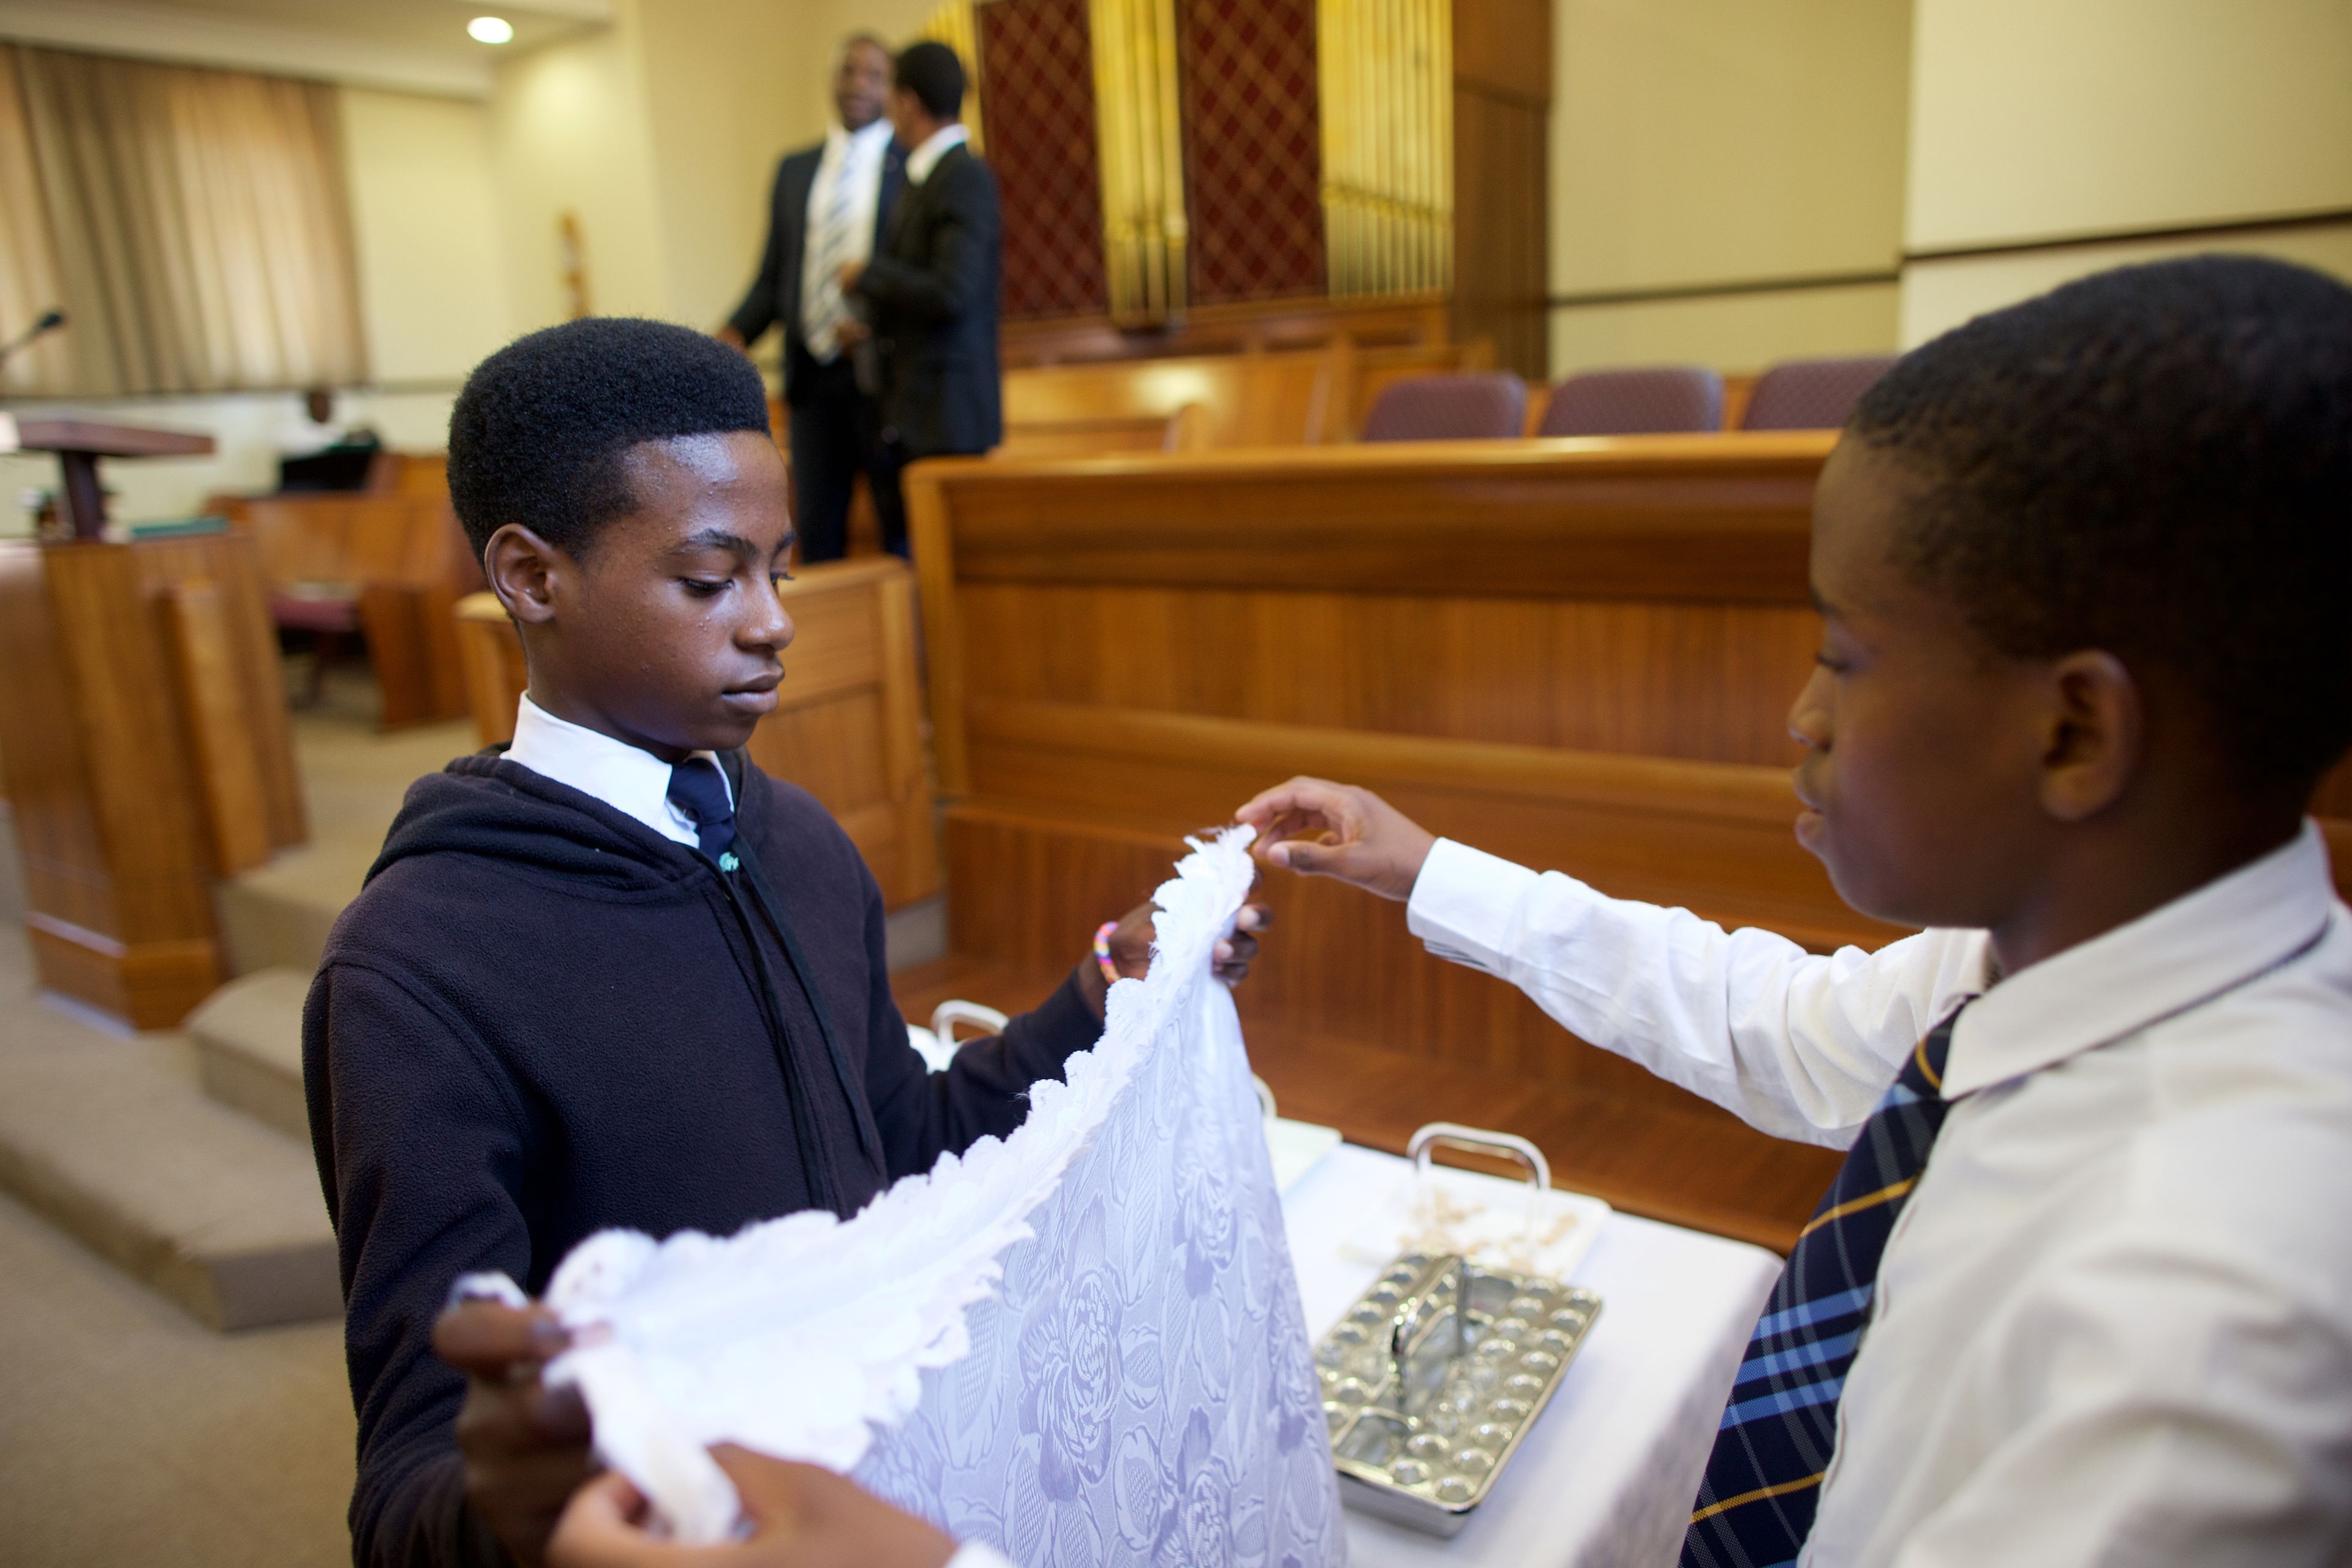 Young men folding up the sacrament cloths after the meeting has concluded.